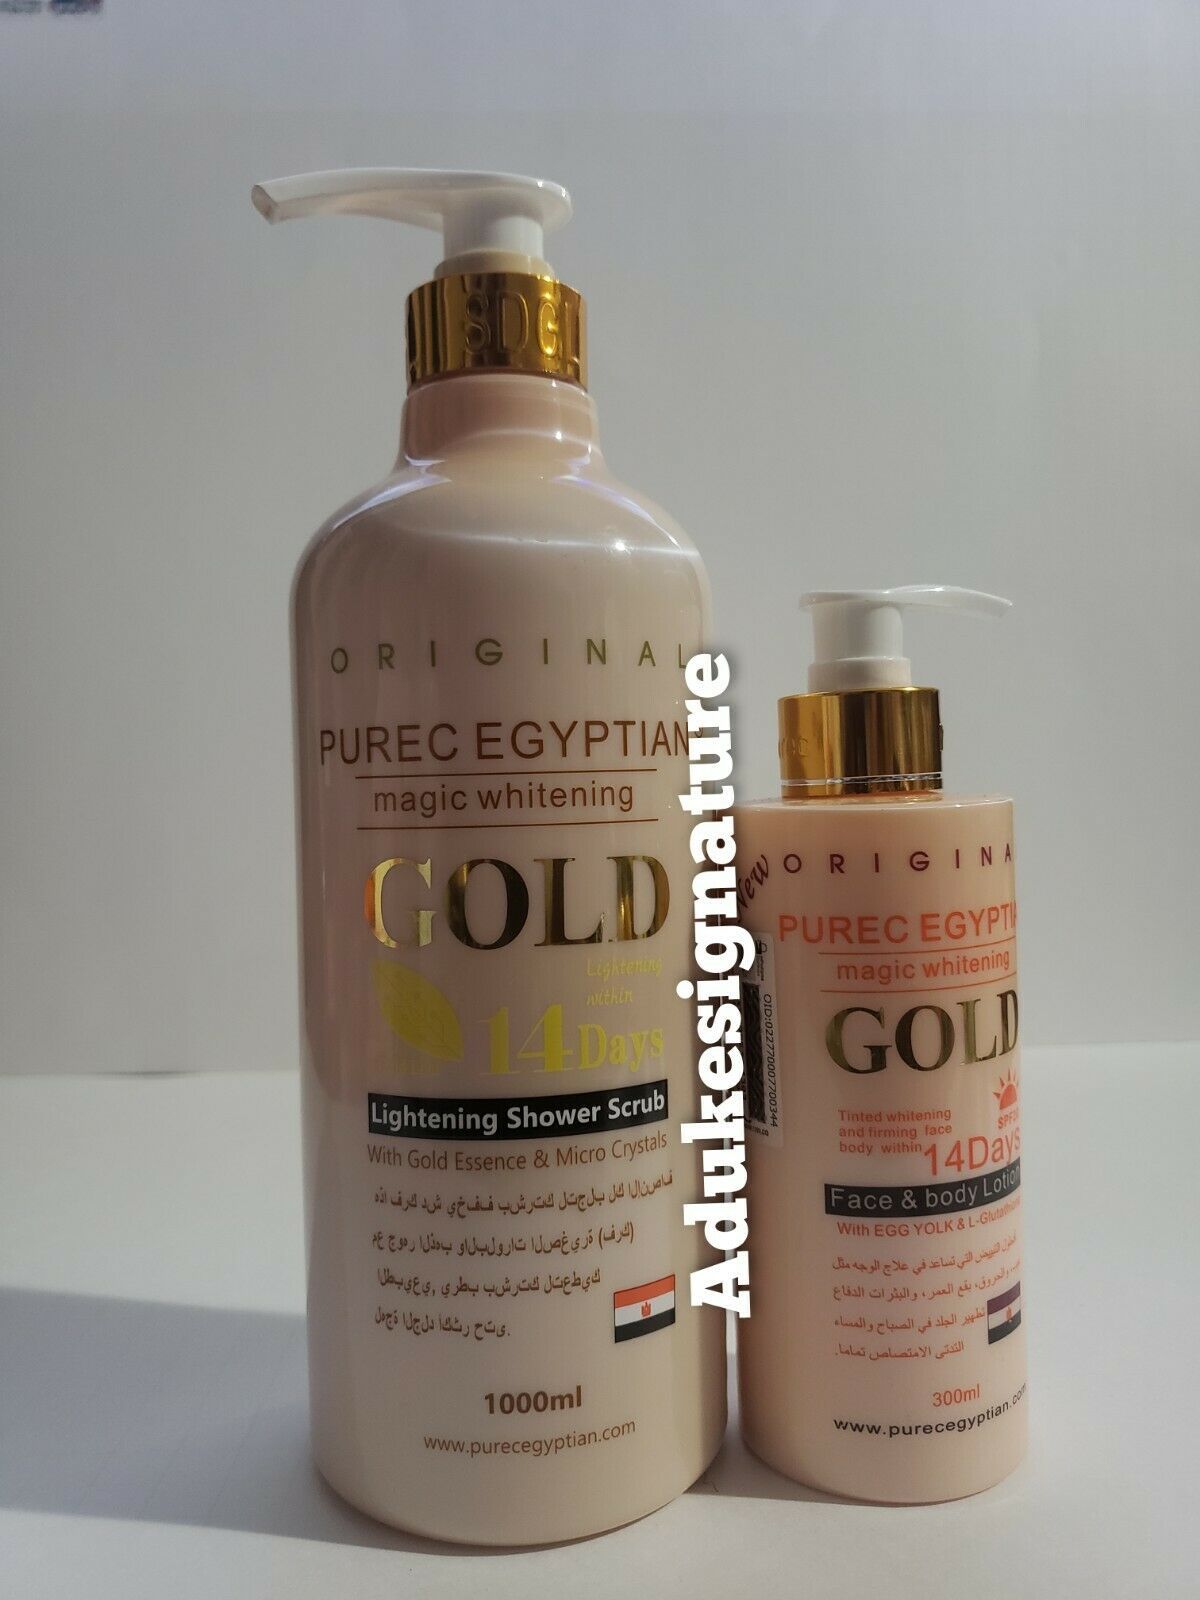 Primary image for purec egyptian magic whitening gold  300ml and shower gel 1000ml